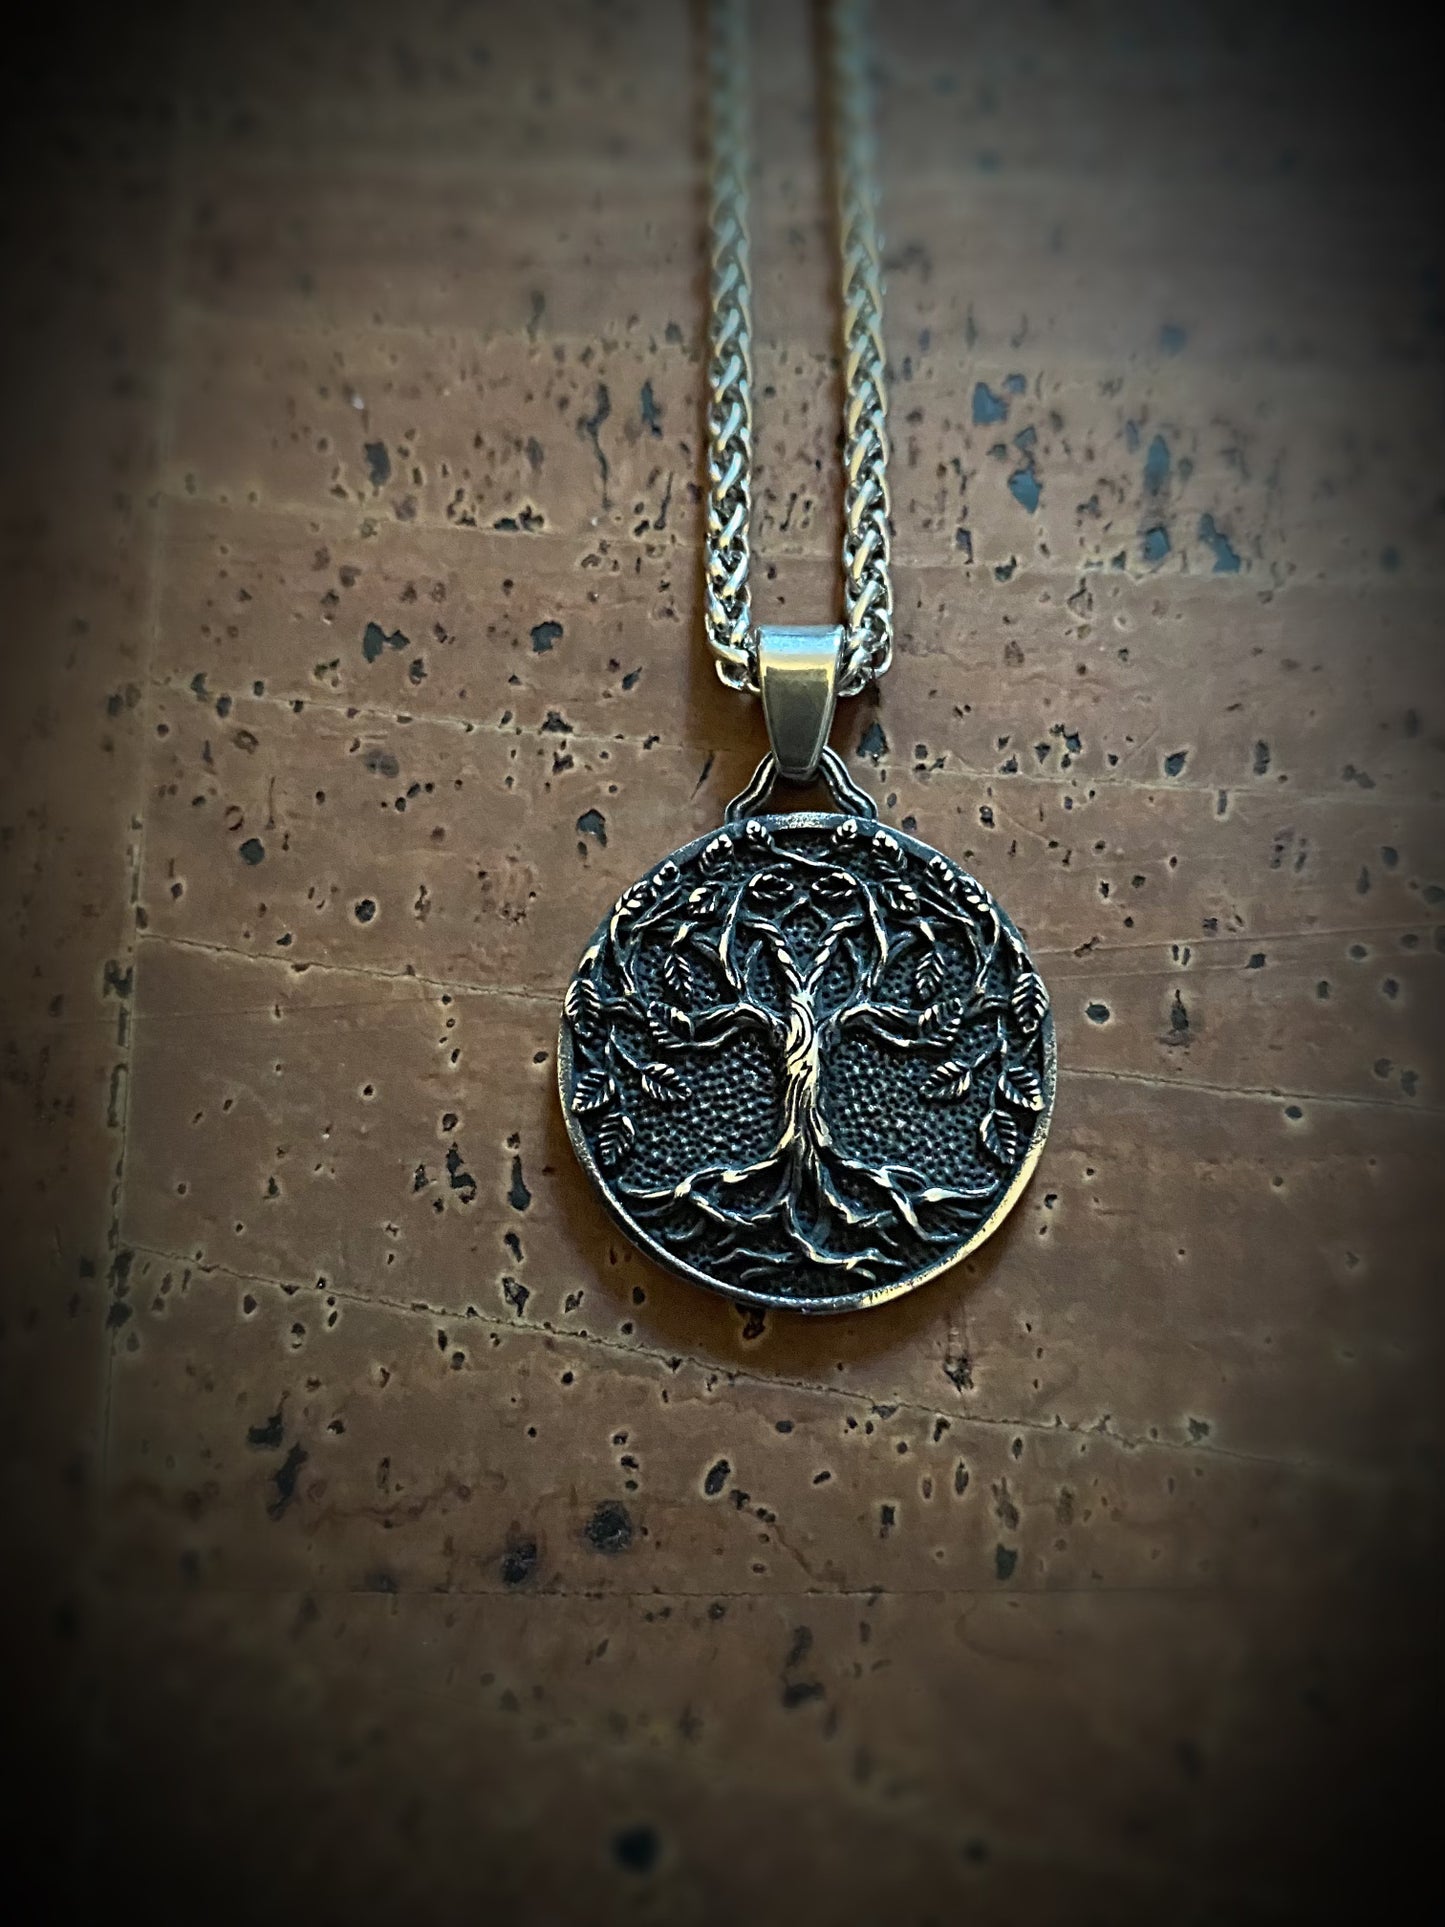 Viking Necklace - The iconic Yggdrasil Tree Of Life